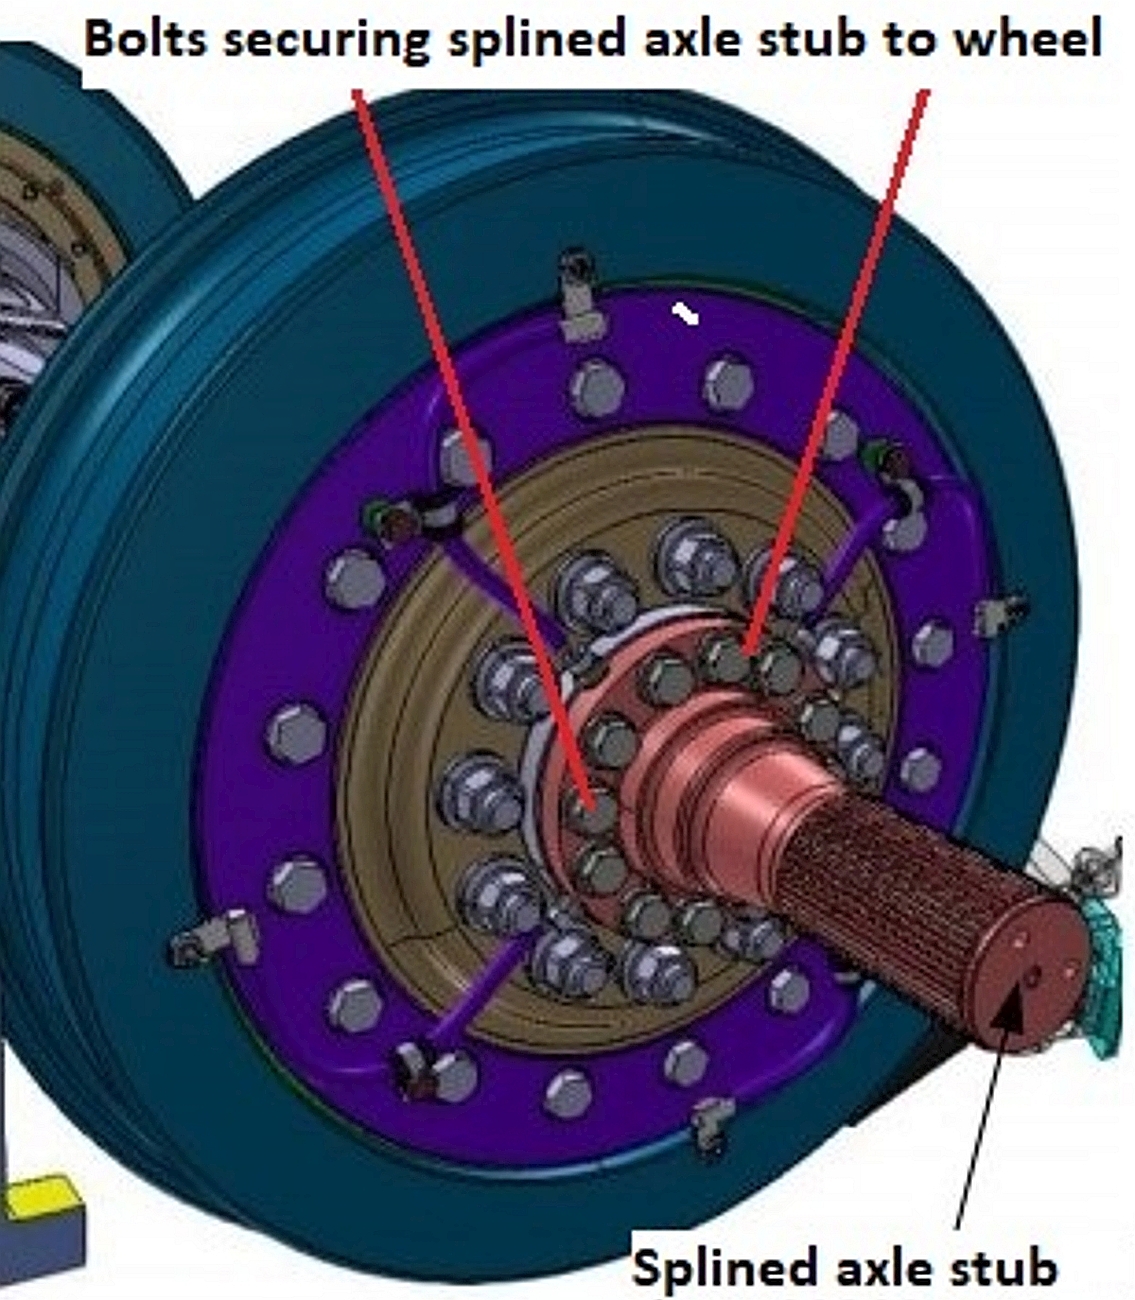 Splined axle stub secured to a wheel (Source: Alstom, with TSB annotations)